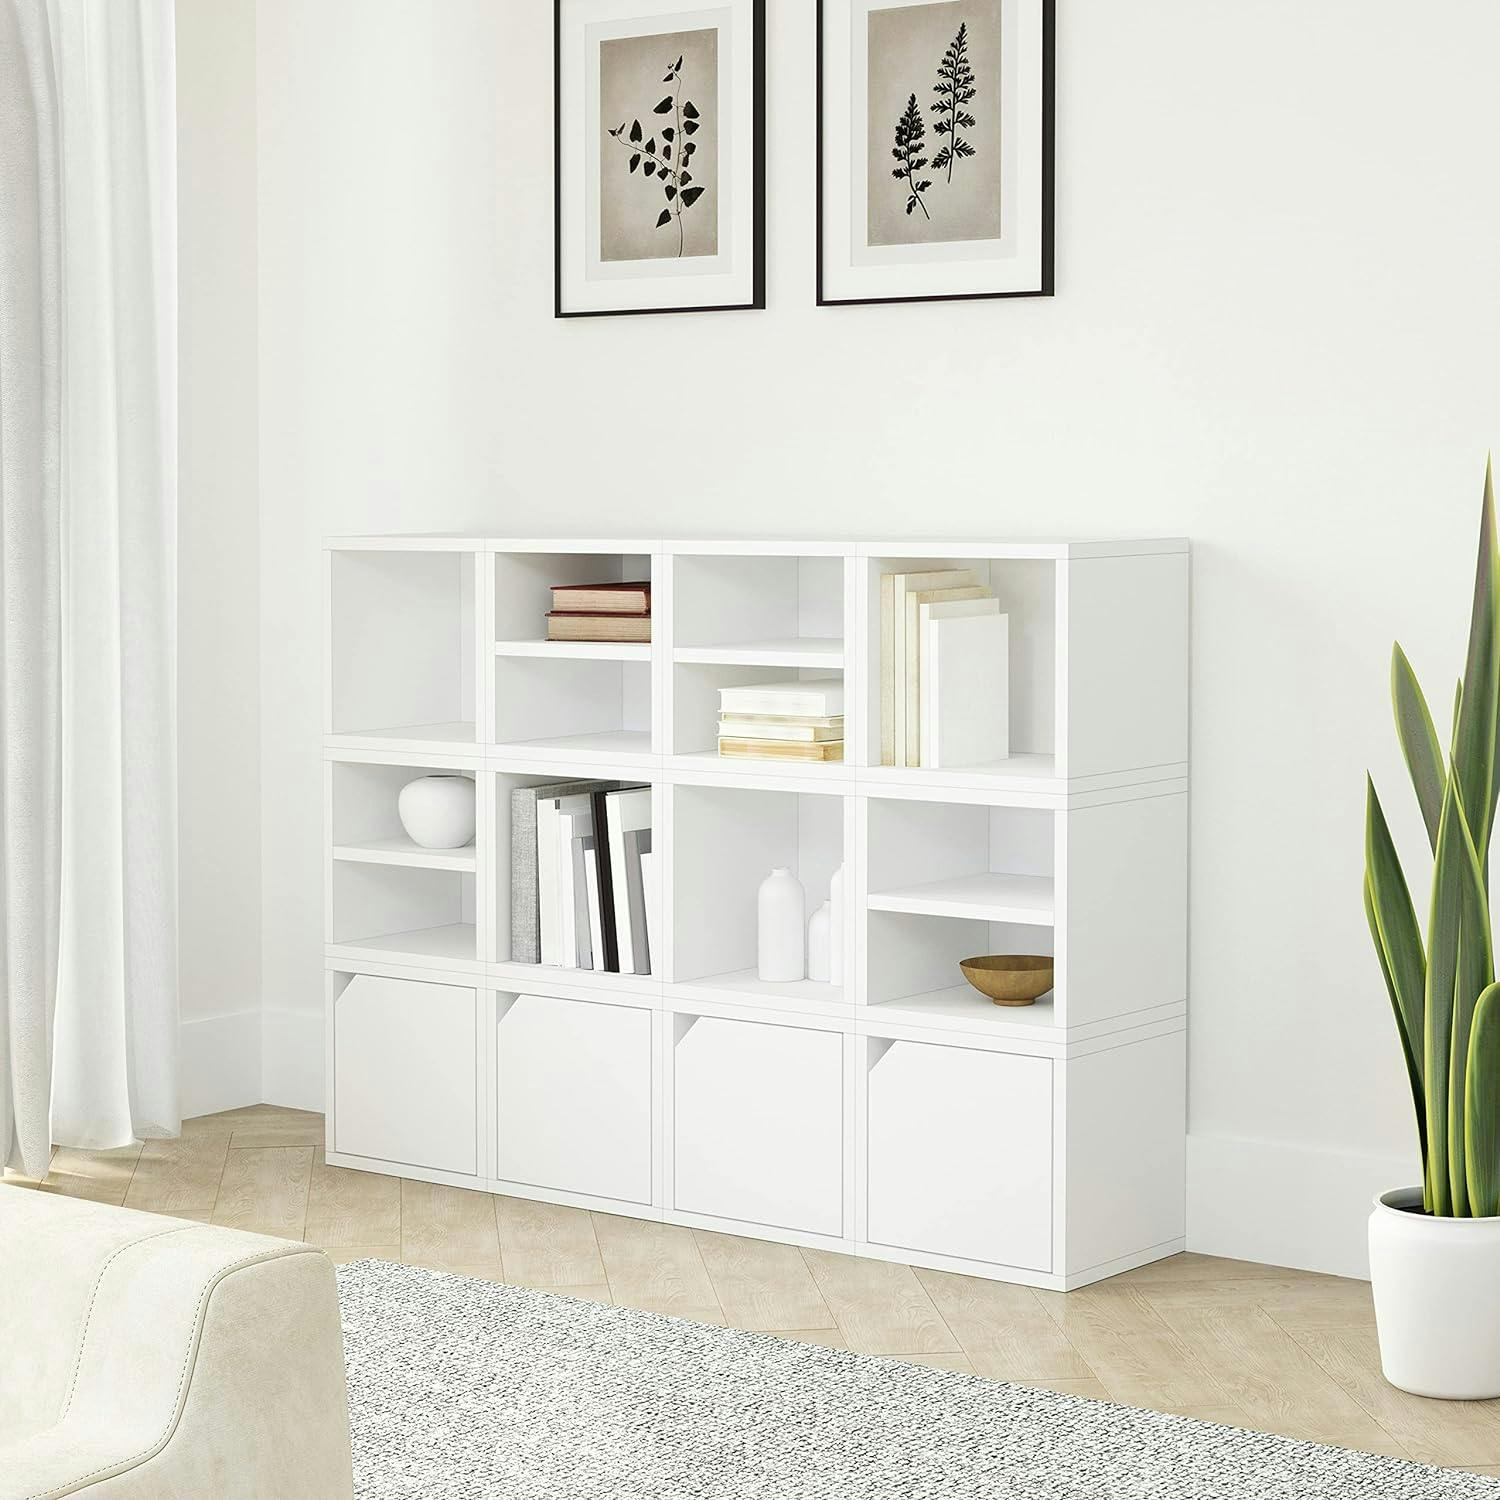 Modular Connect White Storage Cube with Door and Shelf